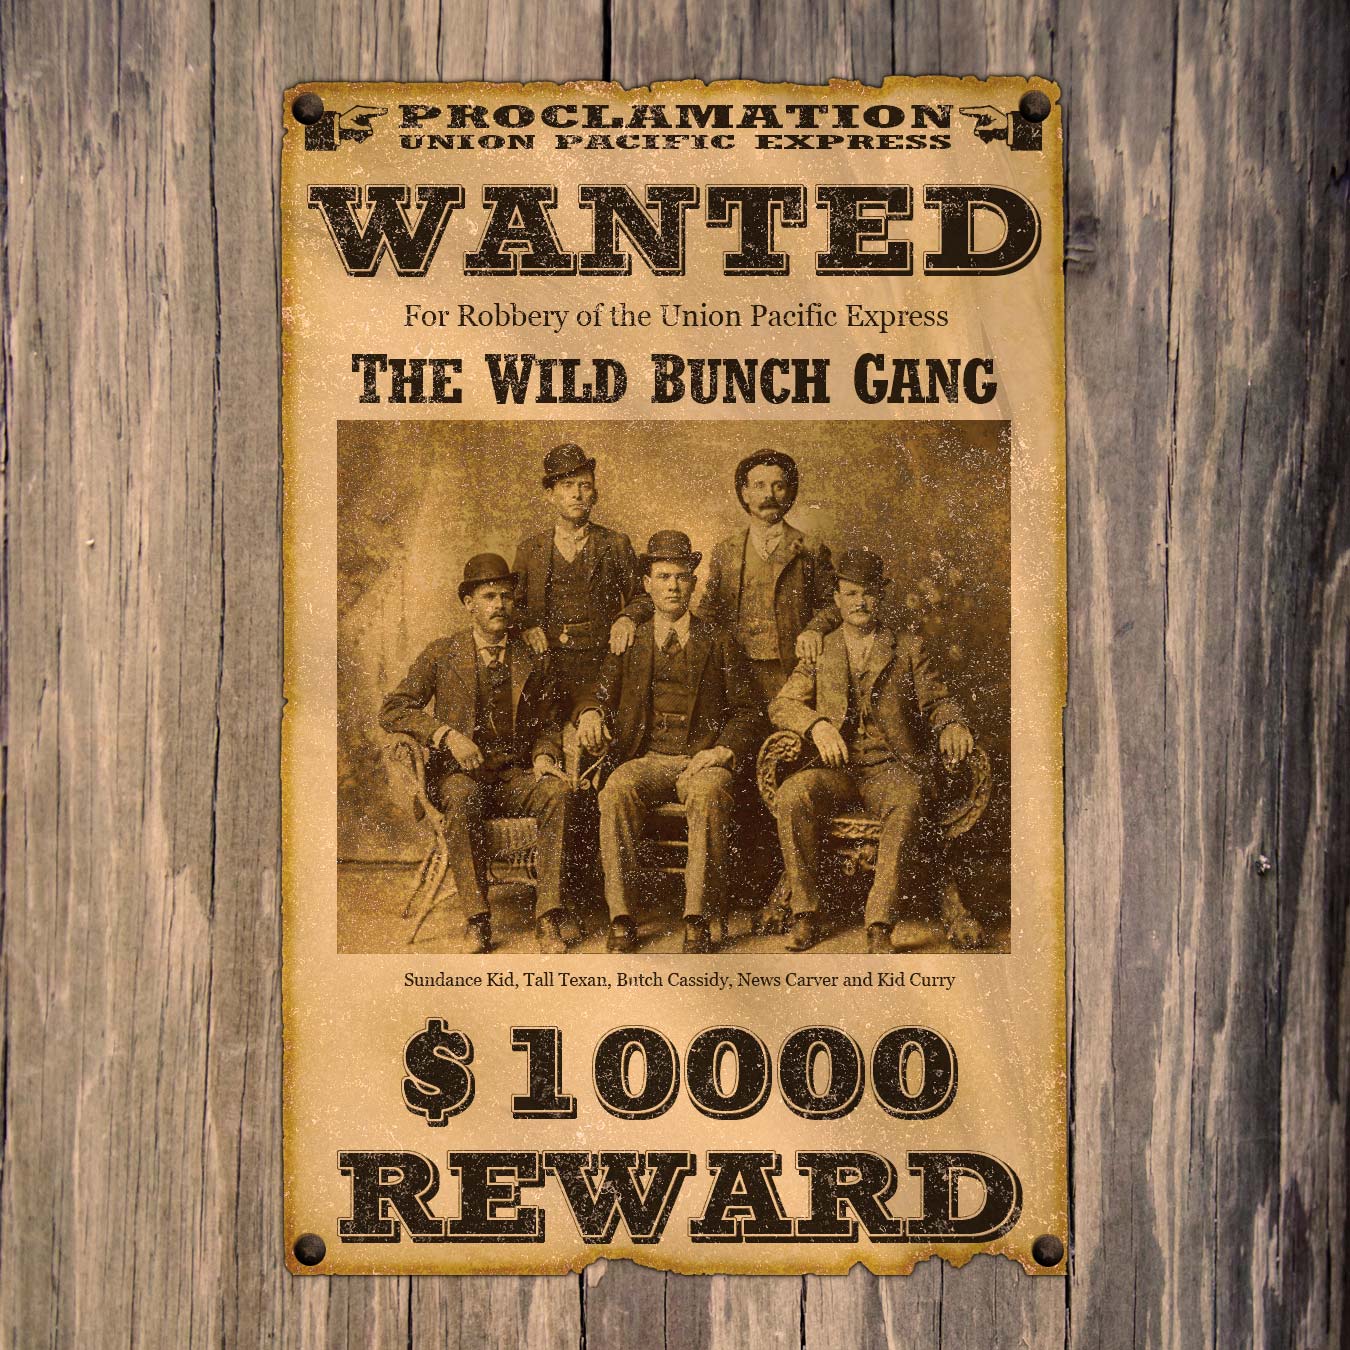 font for wanted poster